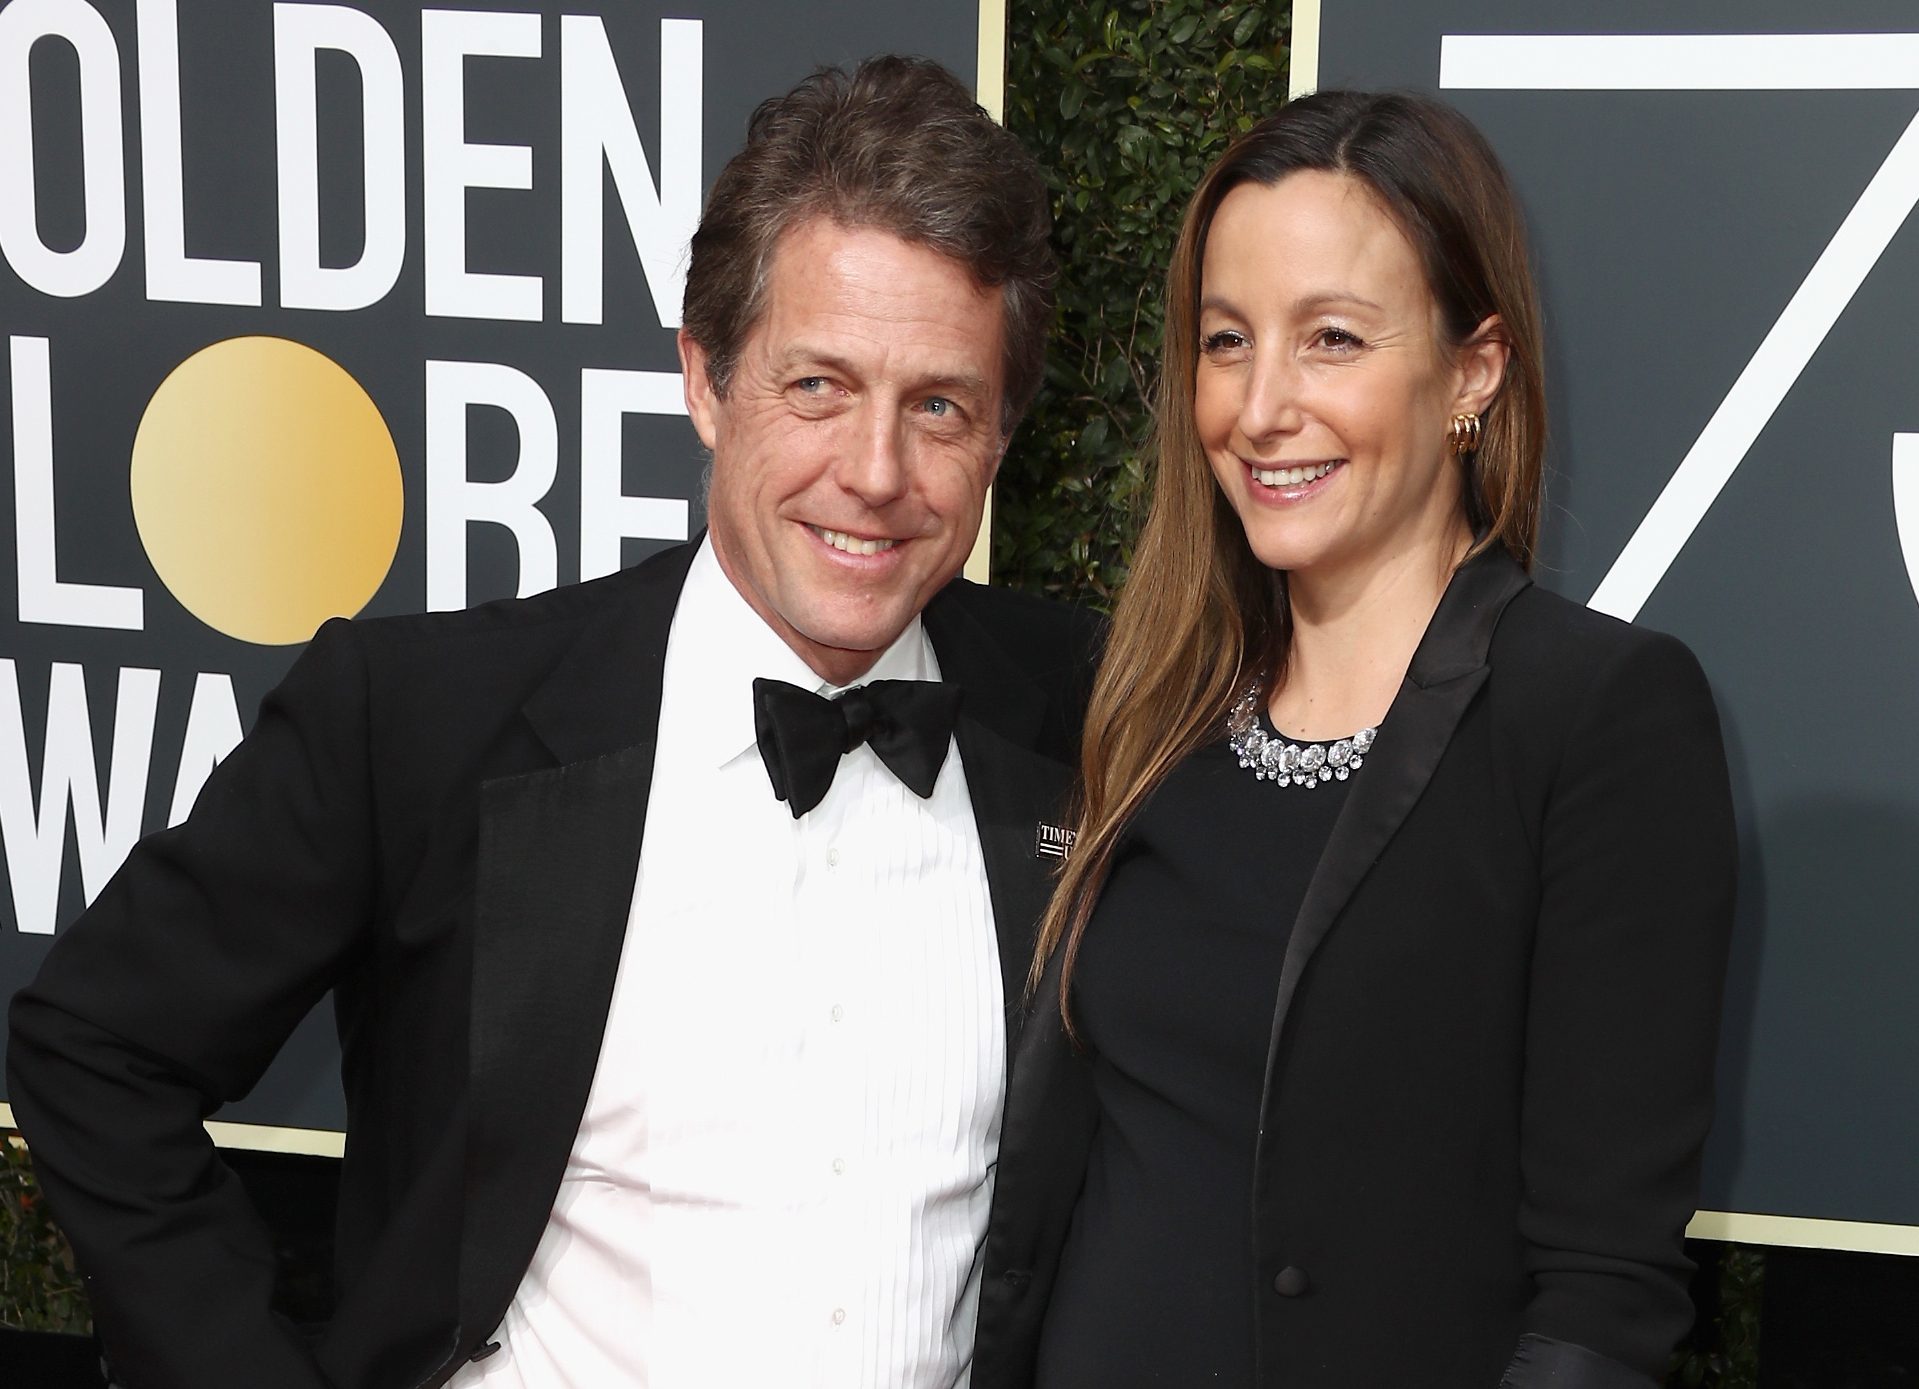 Hugh Grant and Anna Eberstein attend The 75th Annual Golden Globe Awards (Frederick M. Brown/Getty Images)